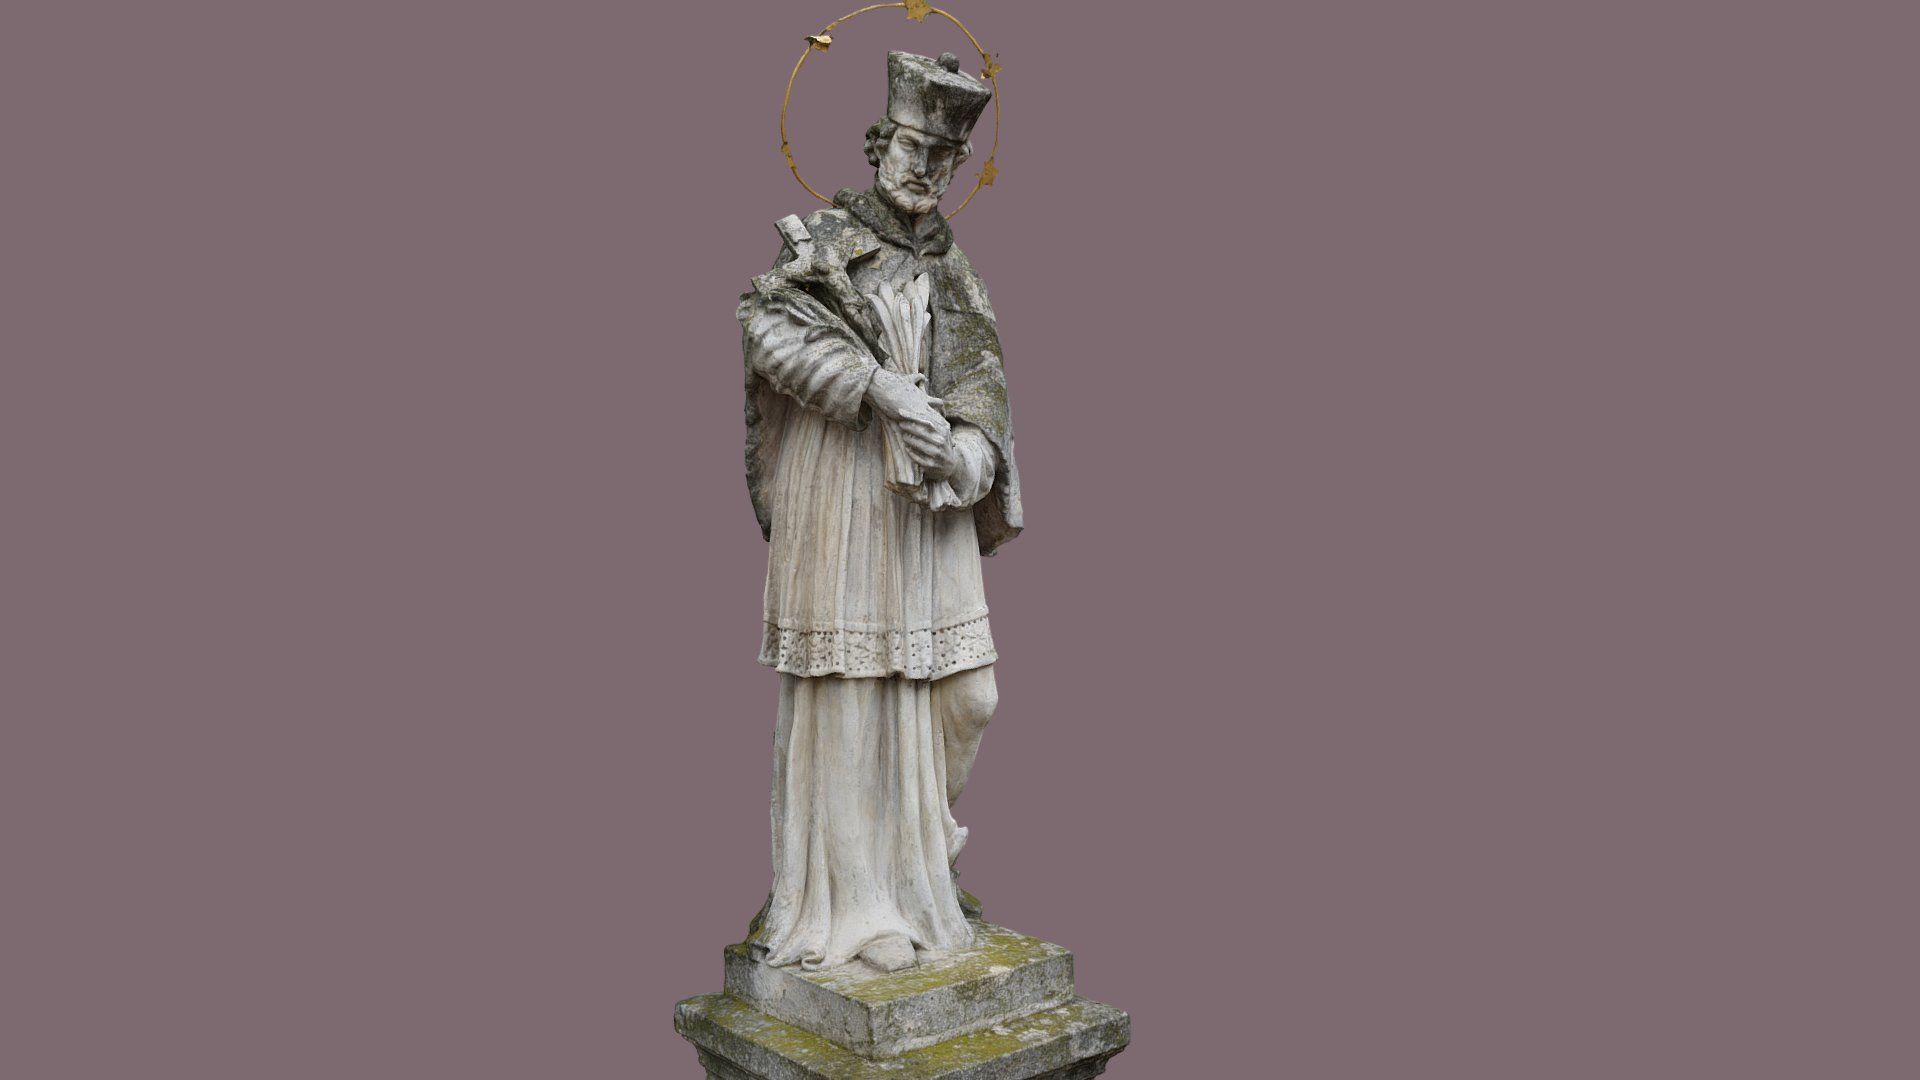 3D model Hl. Nepomuk - This is a 3D model of the Hl. Nepomuk. The 3D model is about a statue of a person holding a staff.